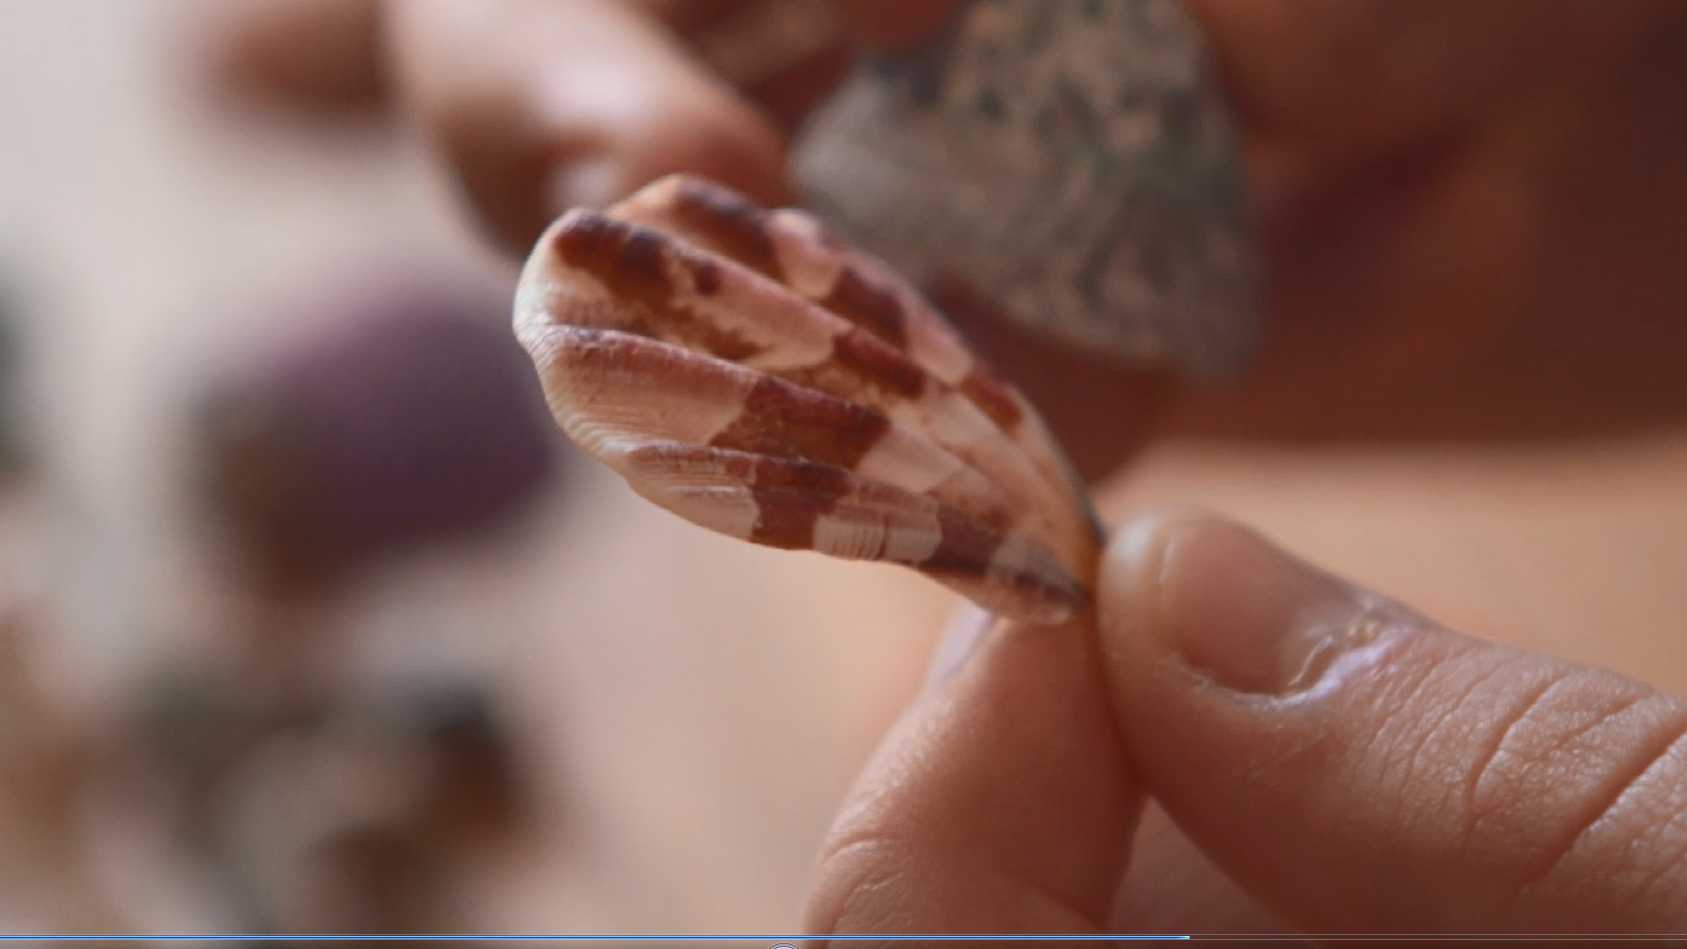 Close up of some shells in someone's hand